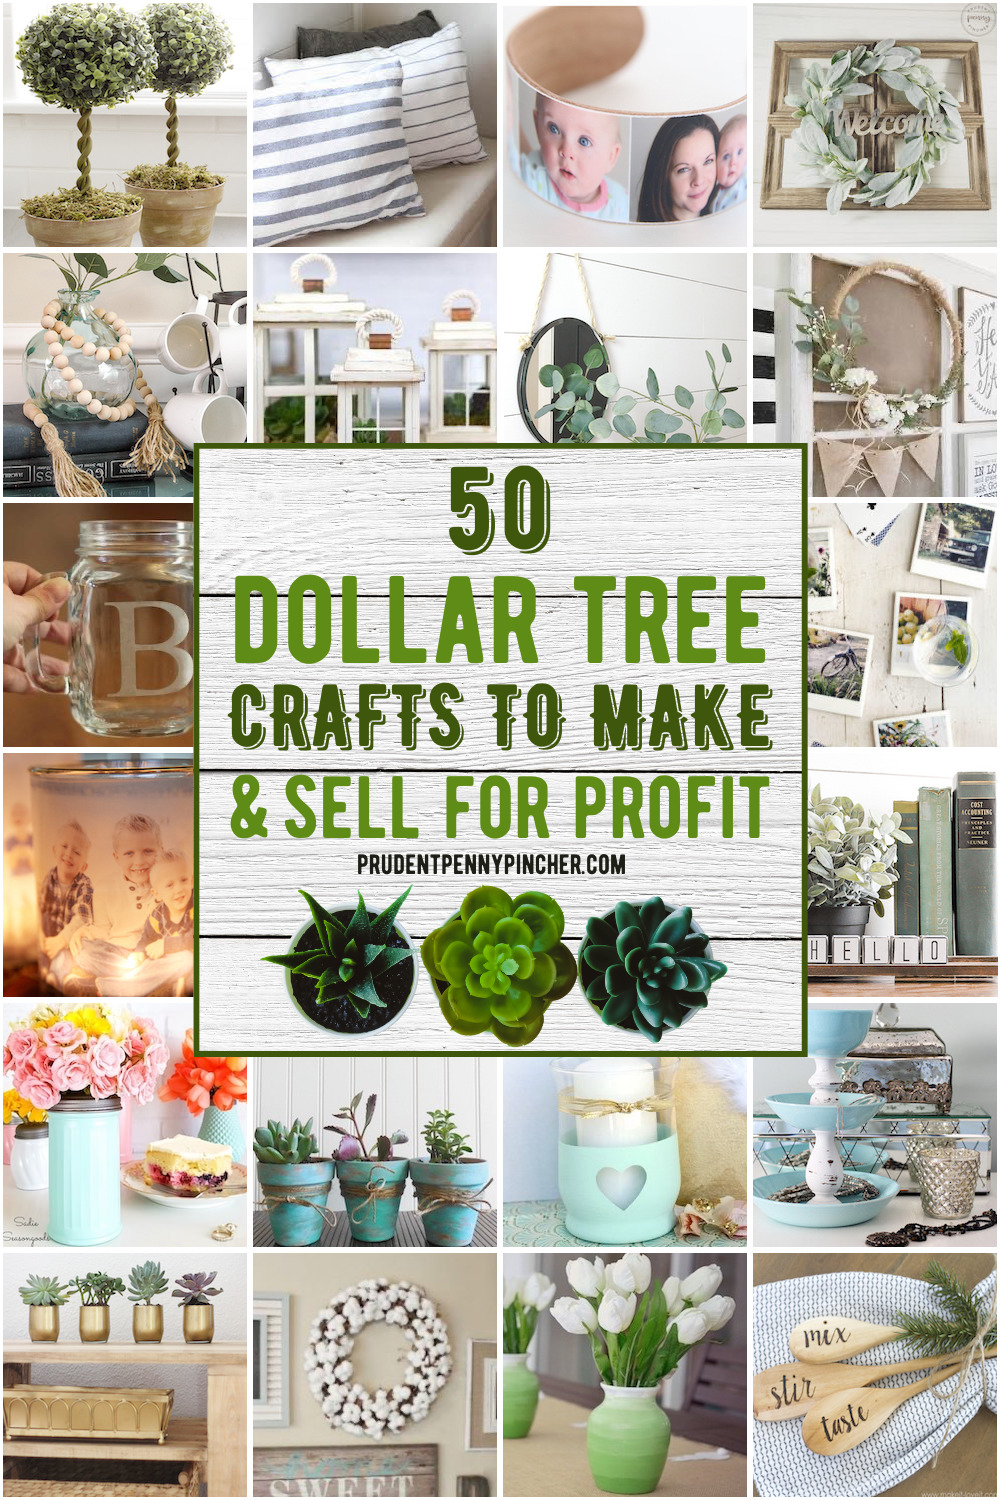 https://www.prudentpennypincher.com/wp-content/uploads/2020/07/dollar-tree-crafts-to-make-and-sell-copy.jpg